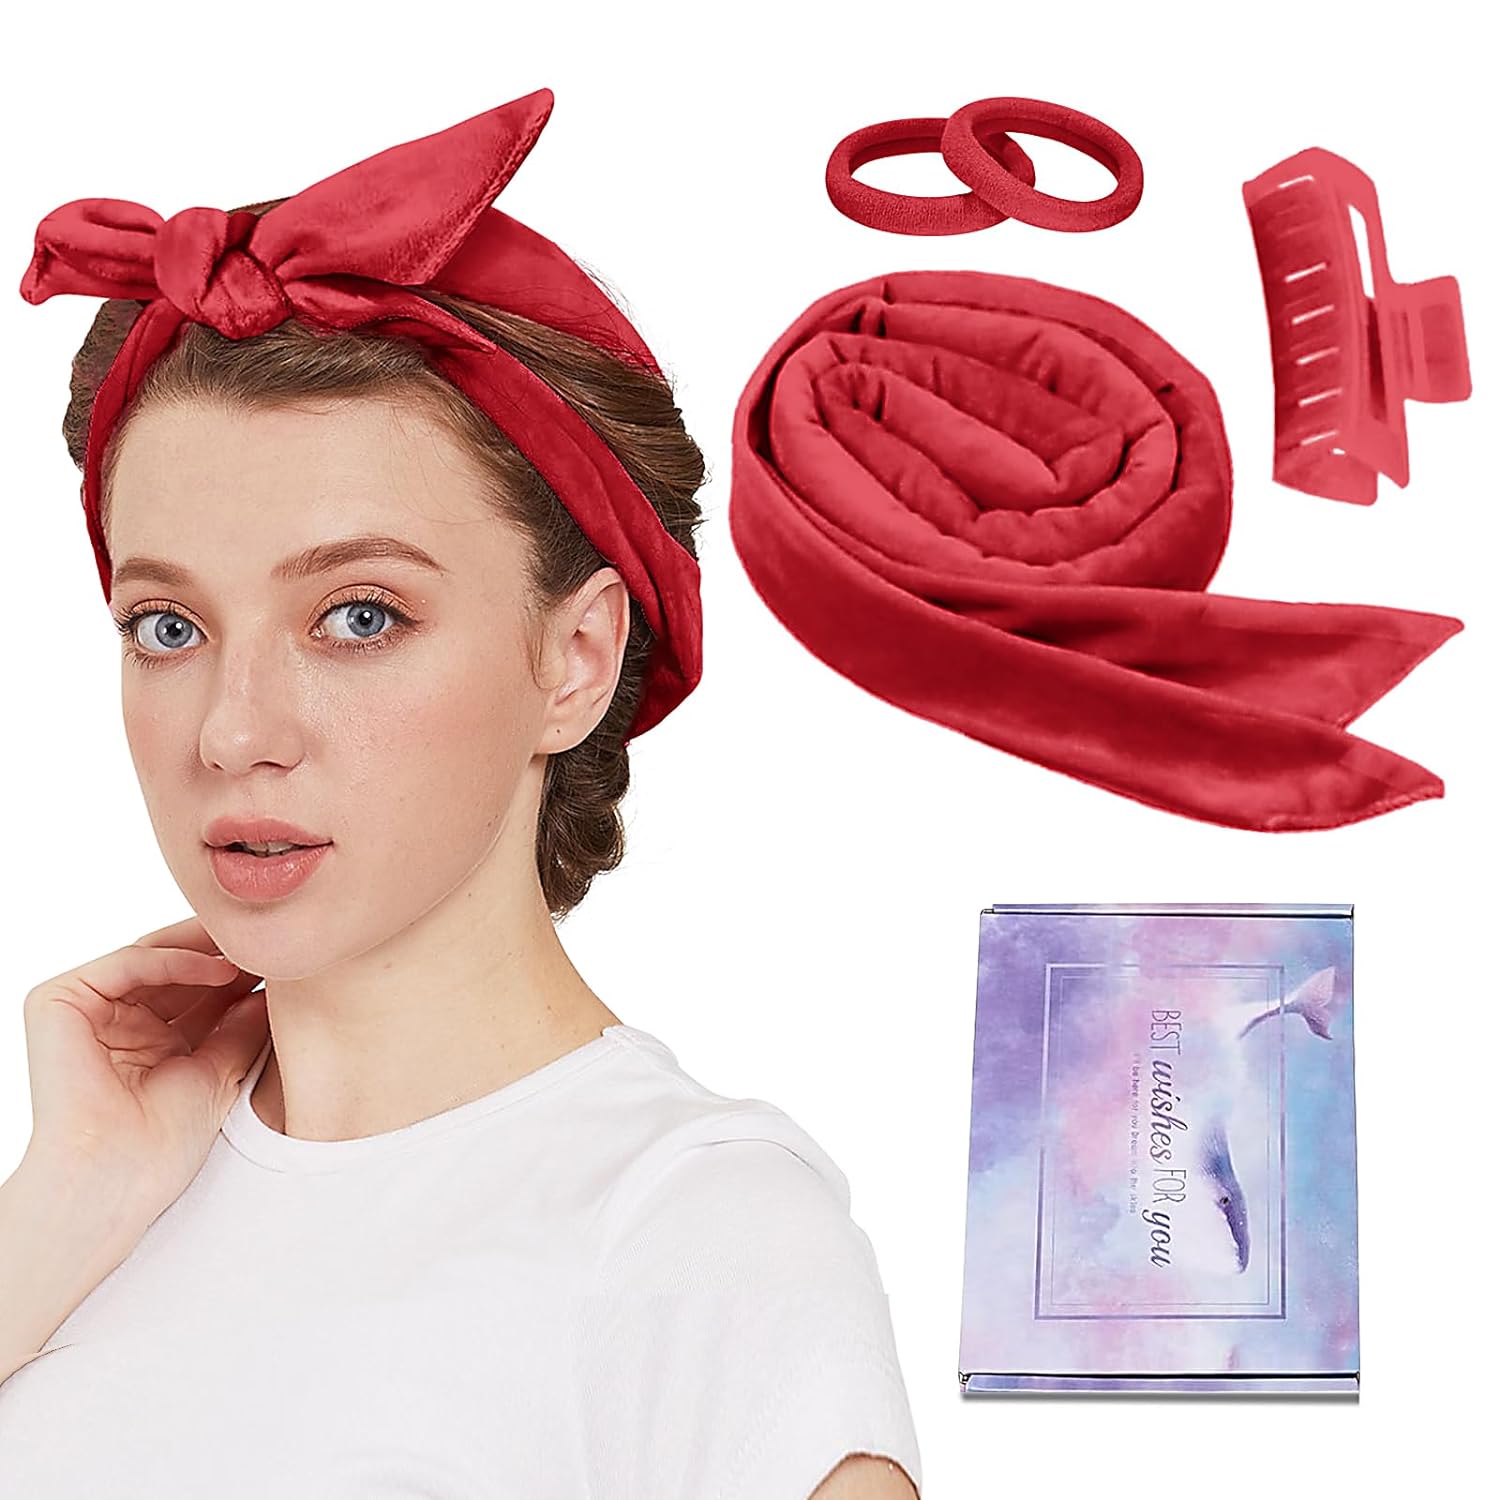 Curler Without Heat, Non-Slip Heatless Velvet Hair Curls Band Overnight with Hairpin, DIY Hair Curler Curling Band, Hairstyle Set for Medium Long Hair, Red
